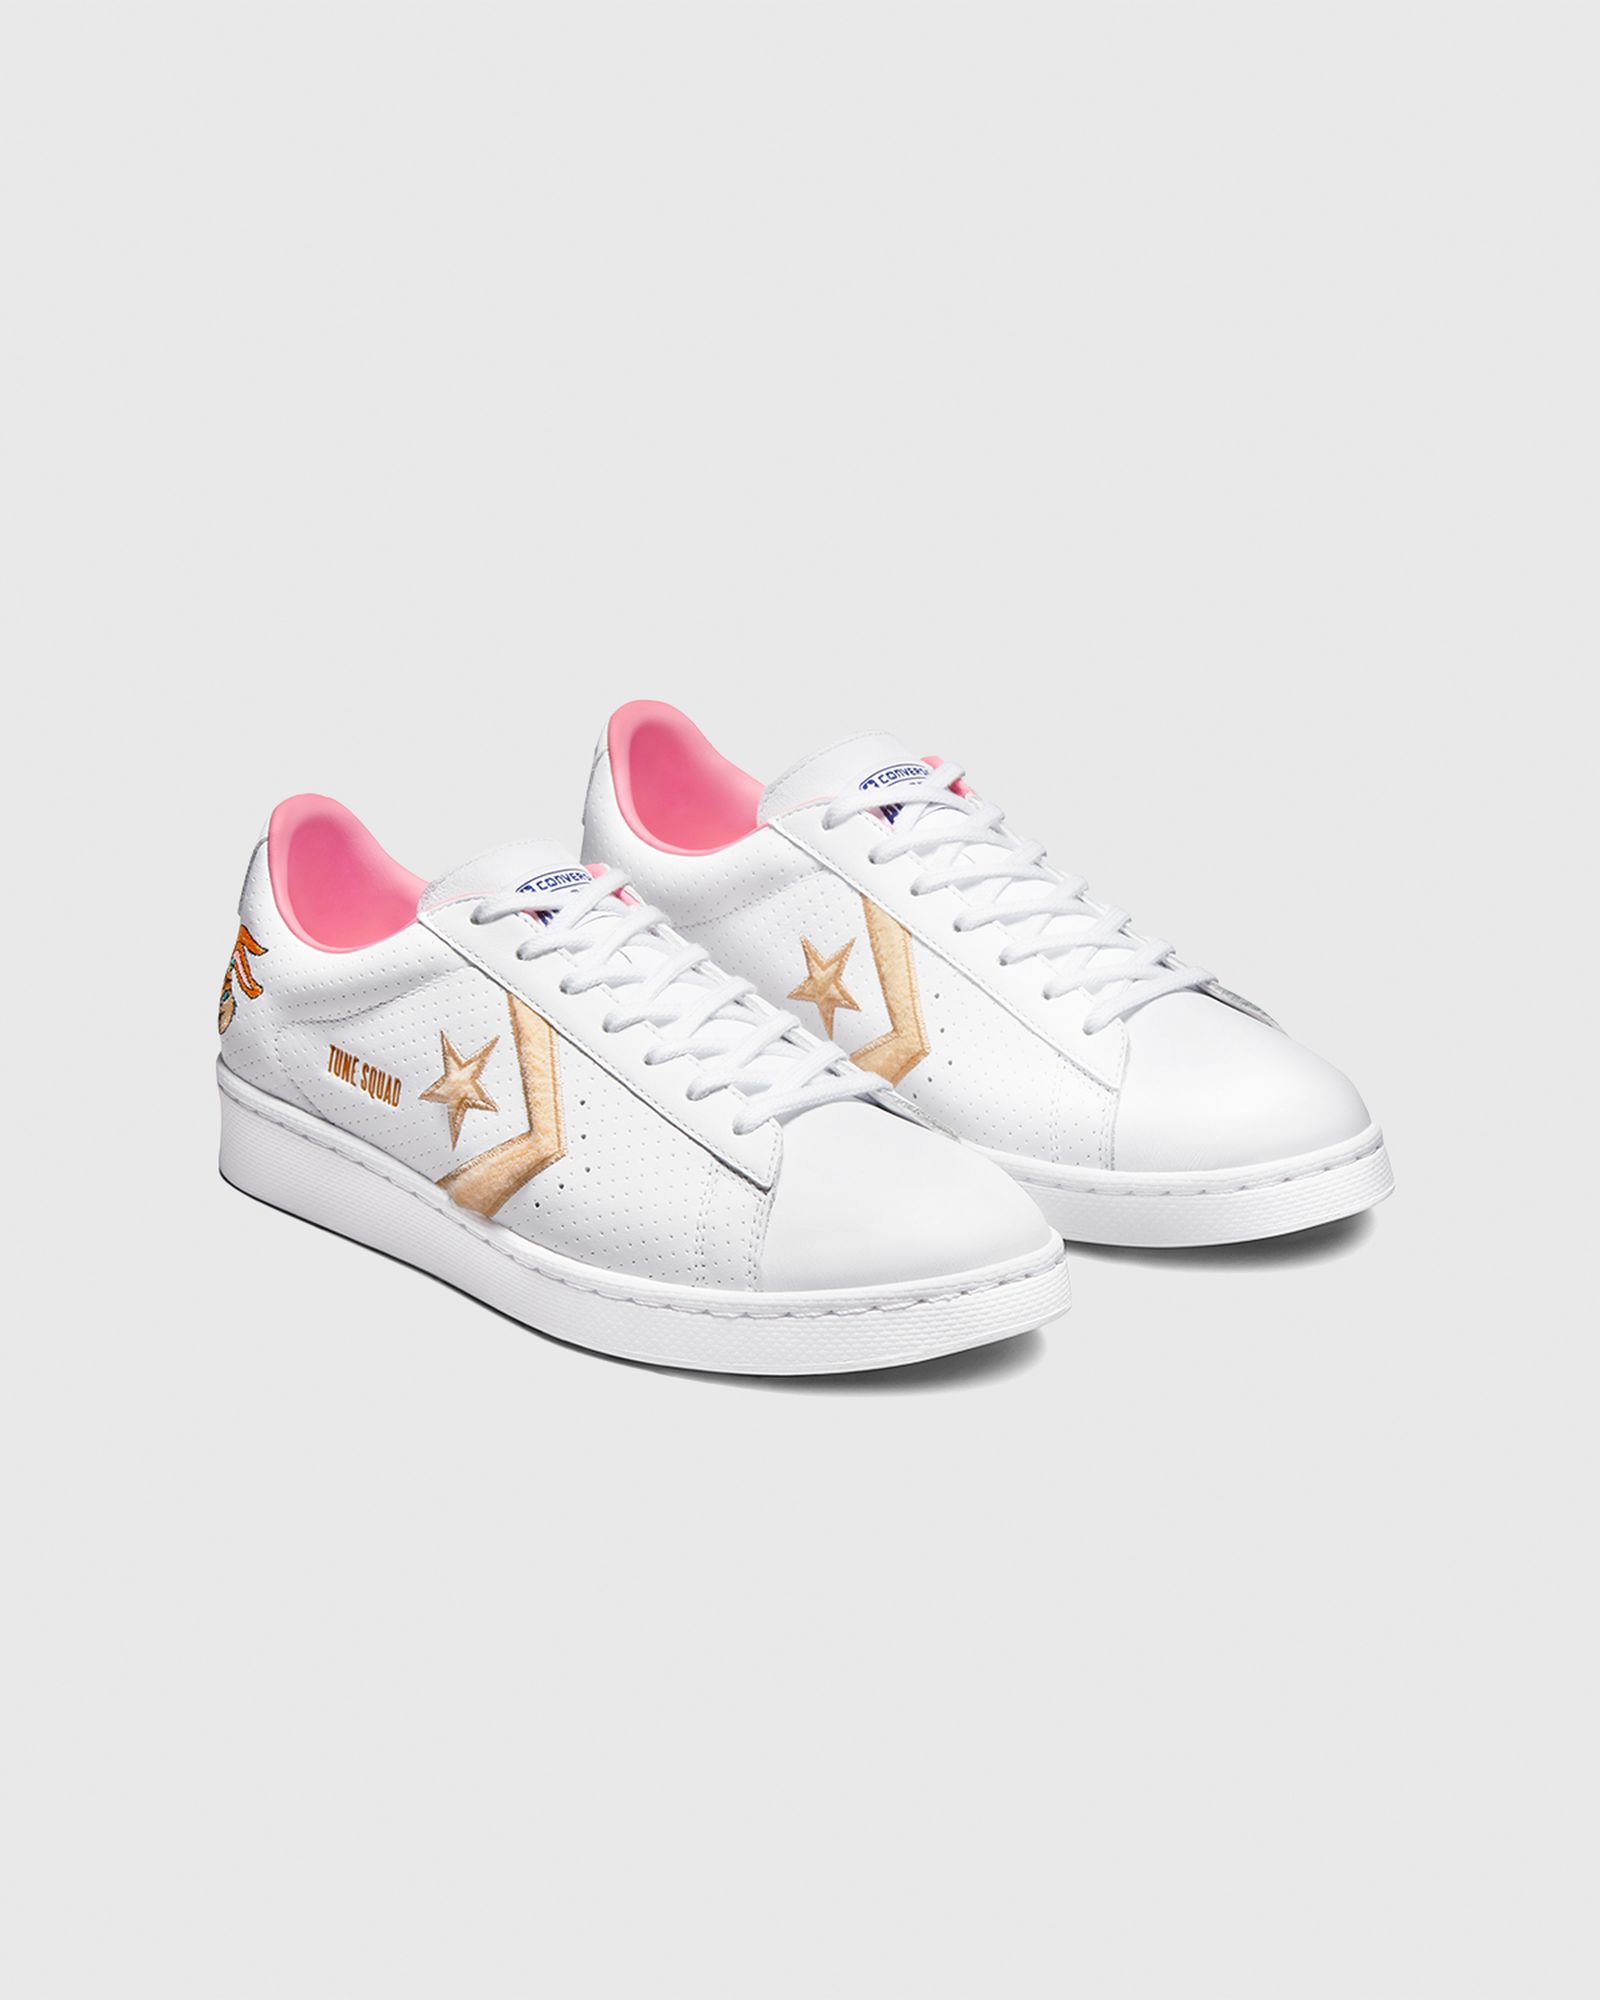 converse-space-jam-2-pack-release-date-price-lola-bunny-04